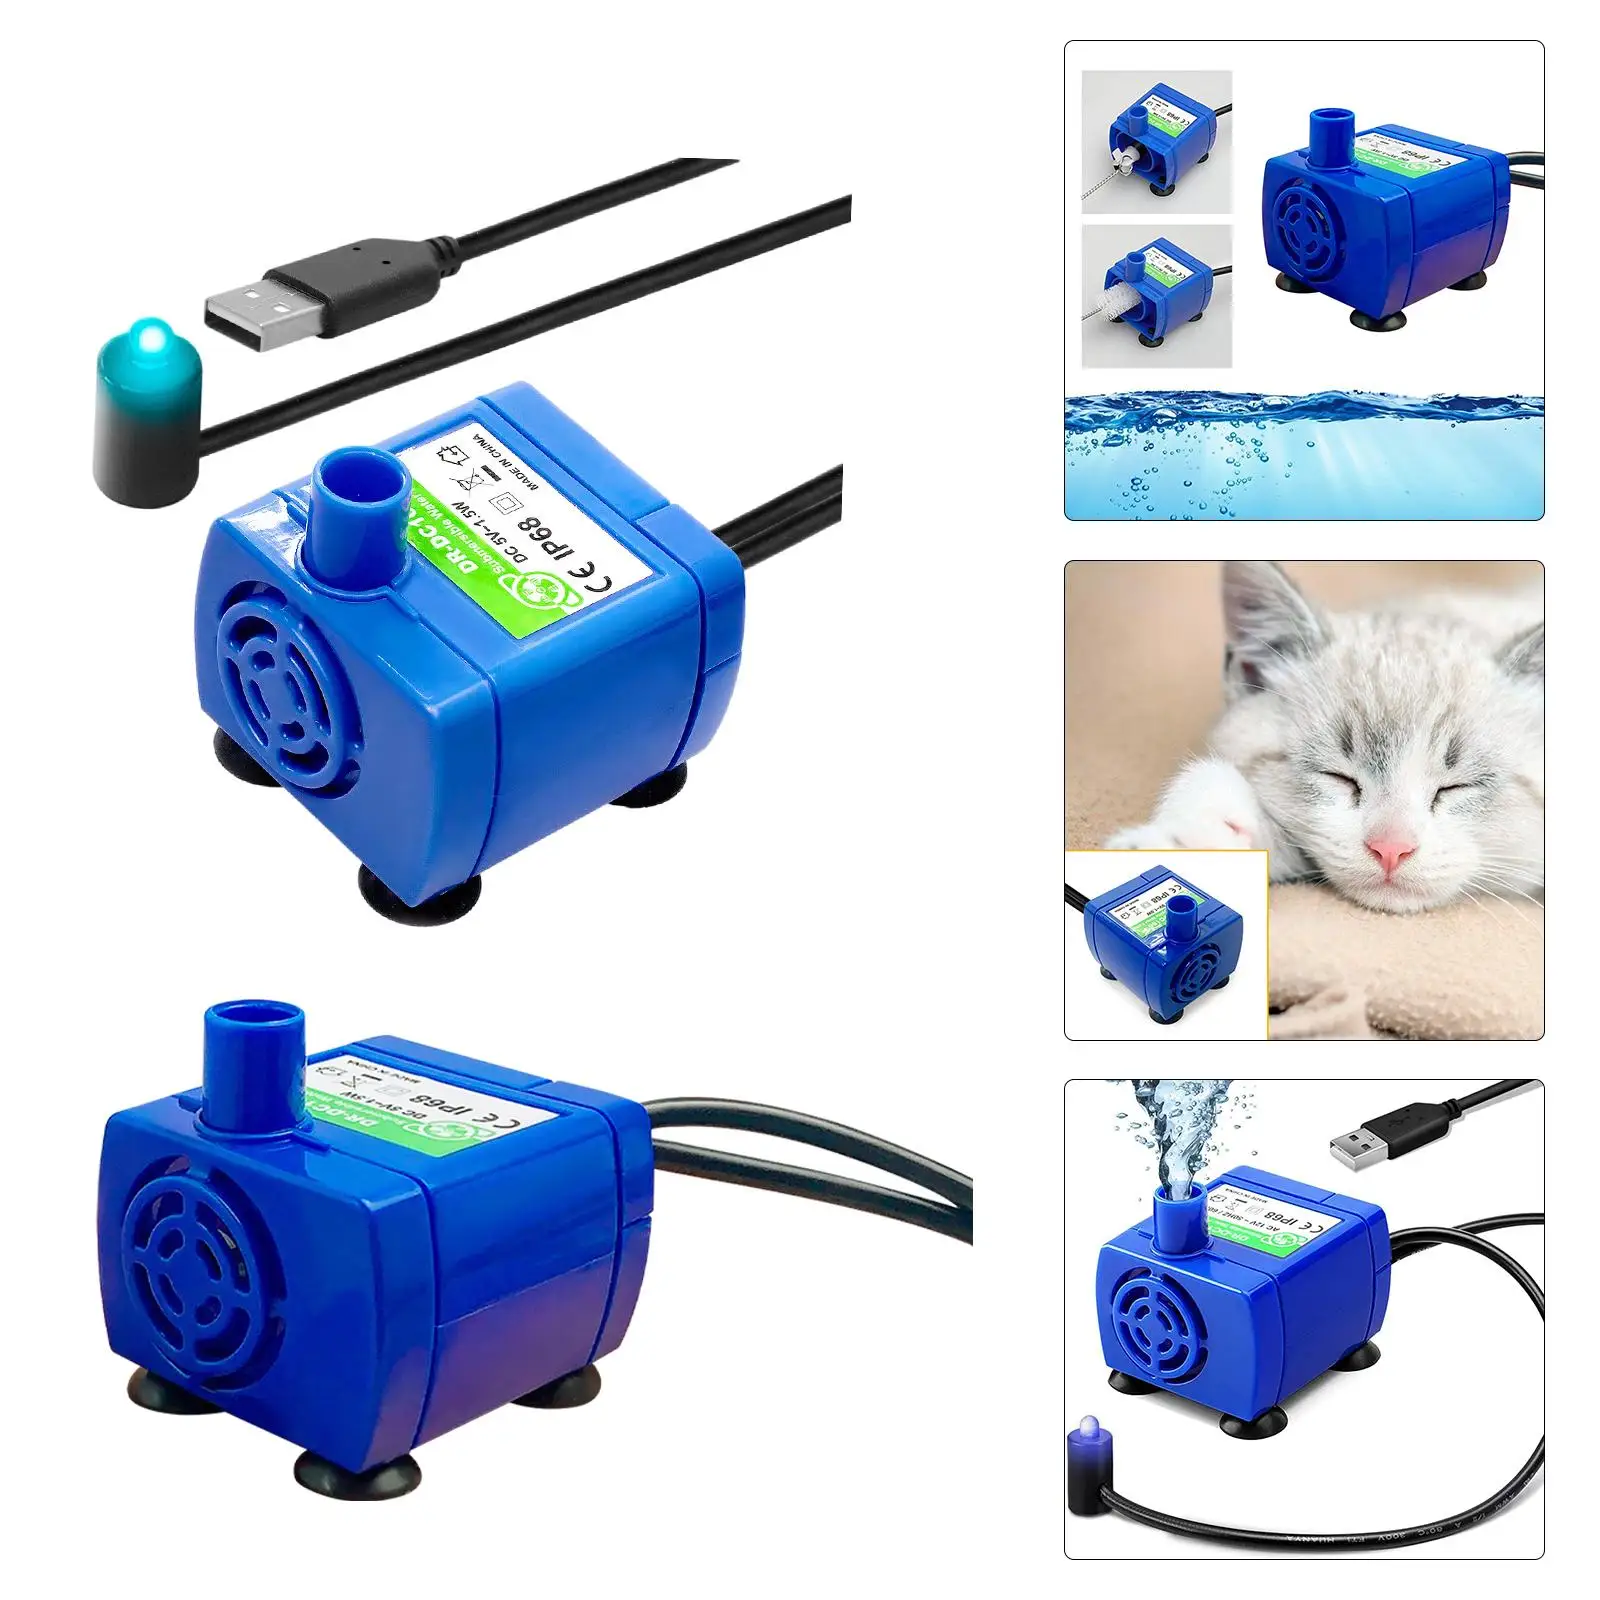  Water Fountain Pump USB Water Motor Upgraded Replacement for Round Fountain